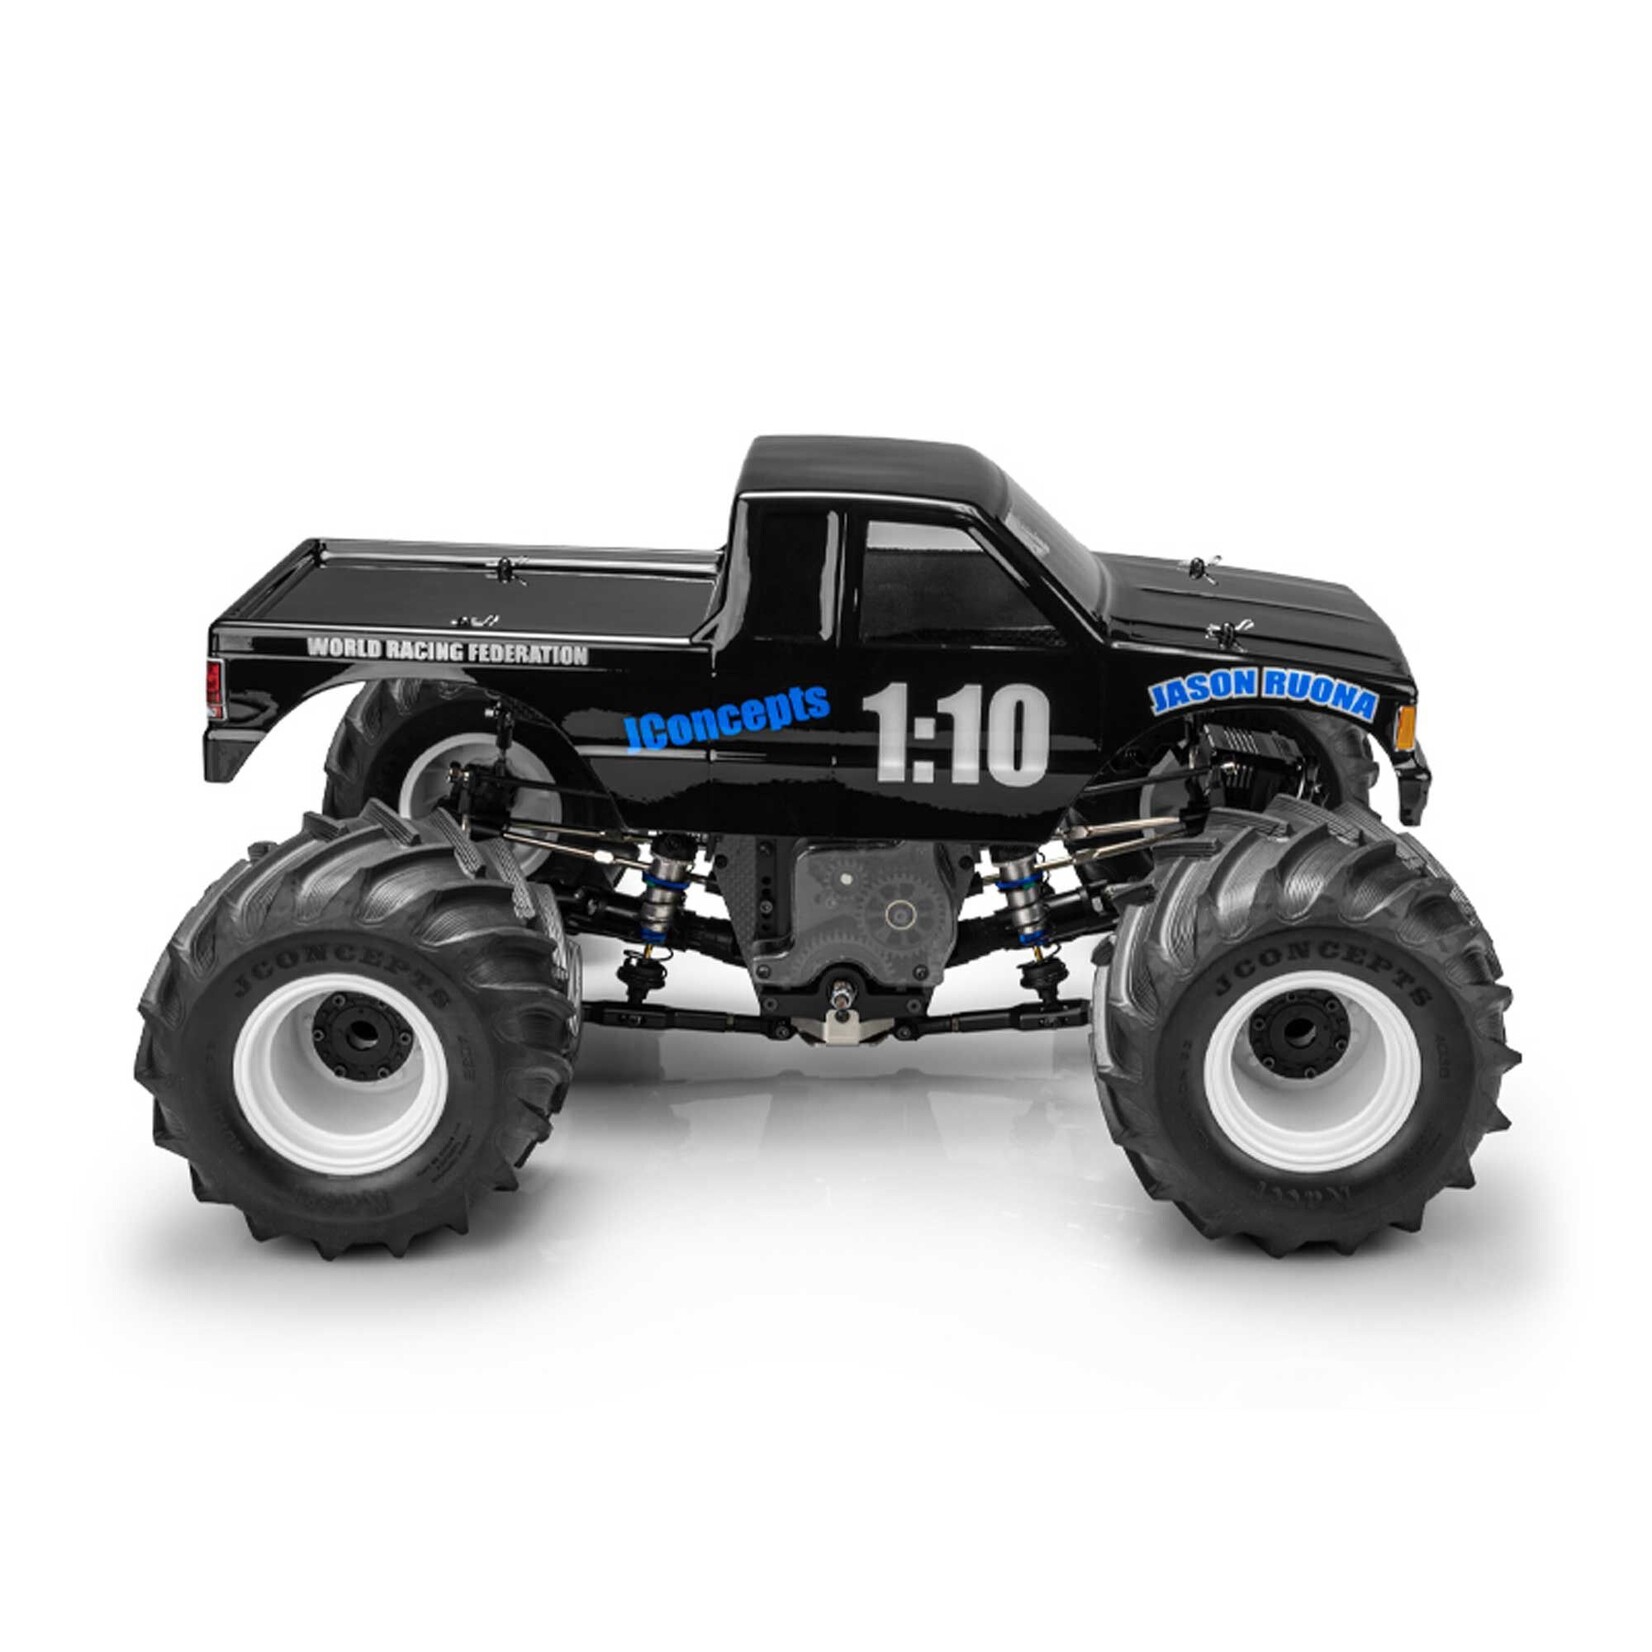 JConcepts 1/10 1990 Chevy S10 Extended Cab Monster Truck Body, 13.0" Wheelbase #0607